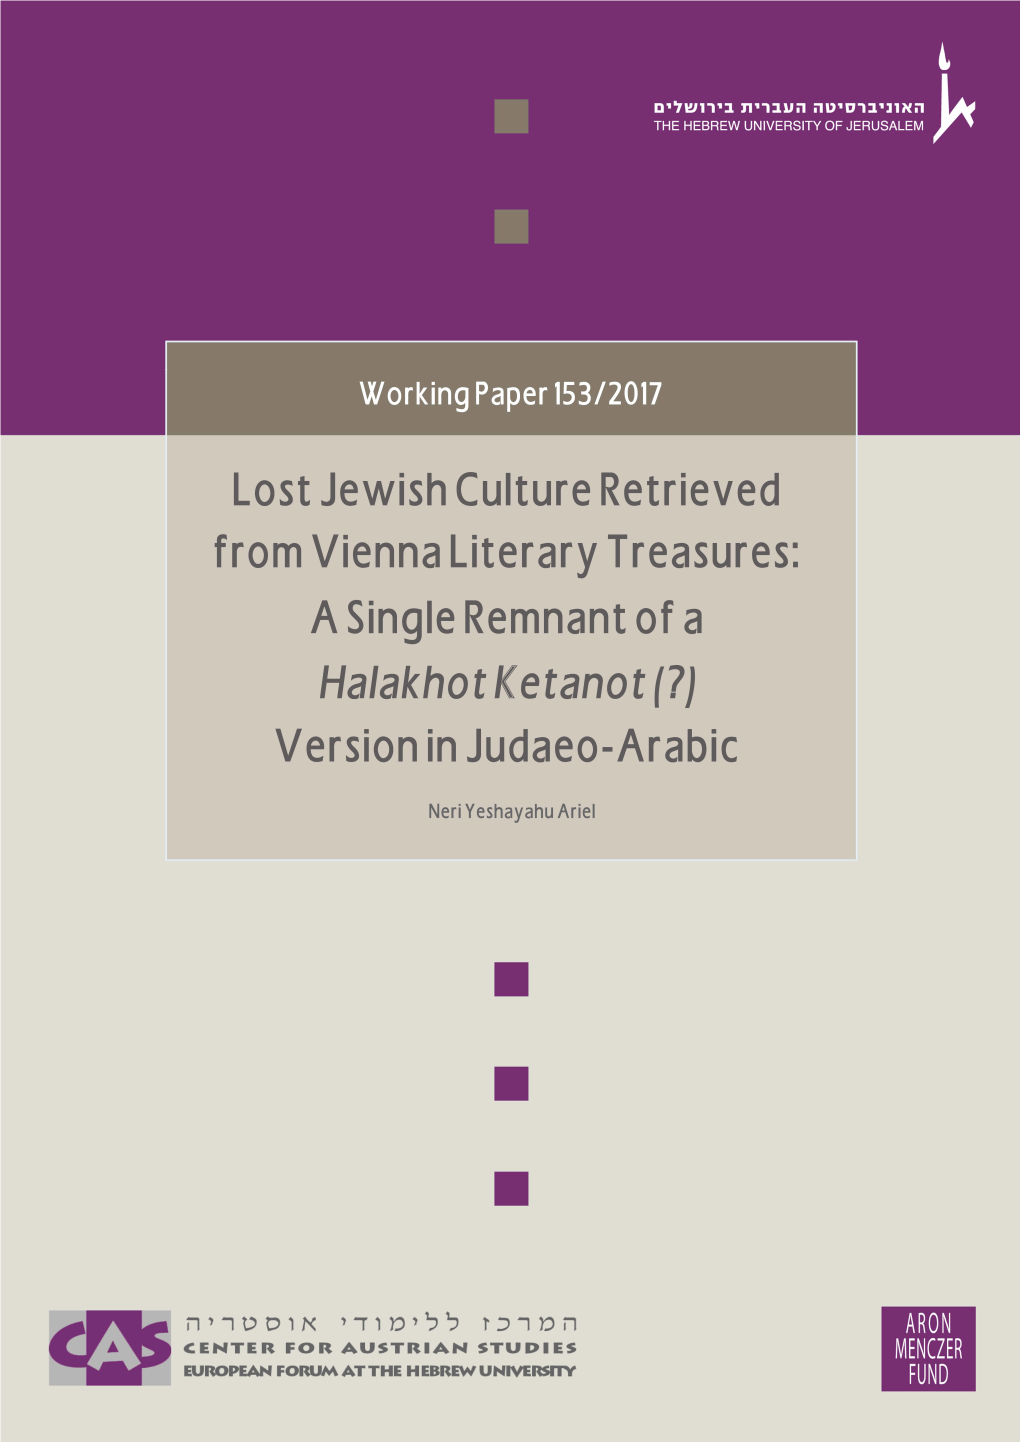 Lost Jewish Culture Retrieved from Vienna Literary Treasures: a Single Remnant of a Halakhot Ketanot (?) Version in Judaeo-Arabic